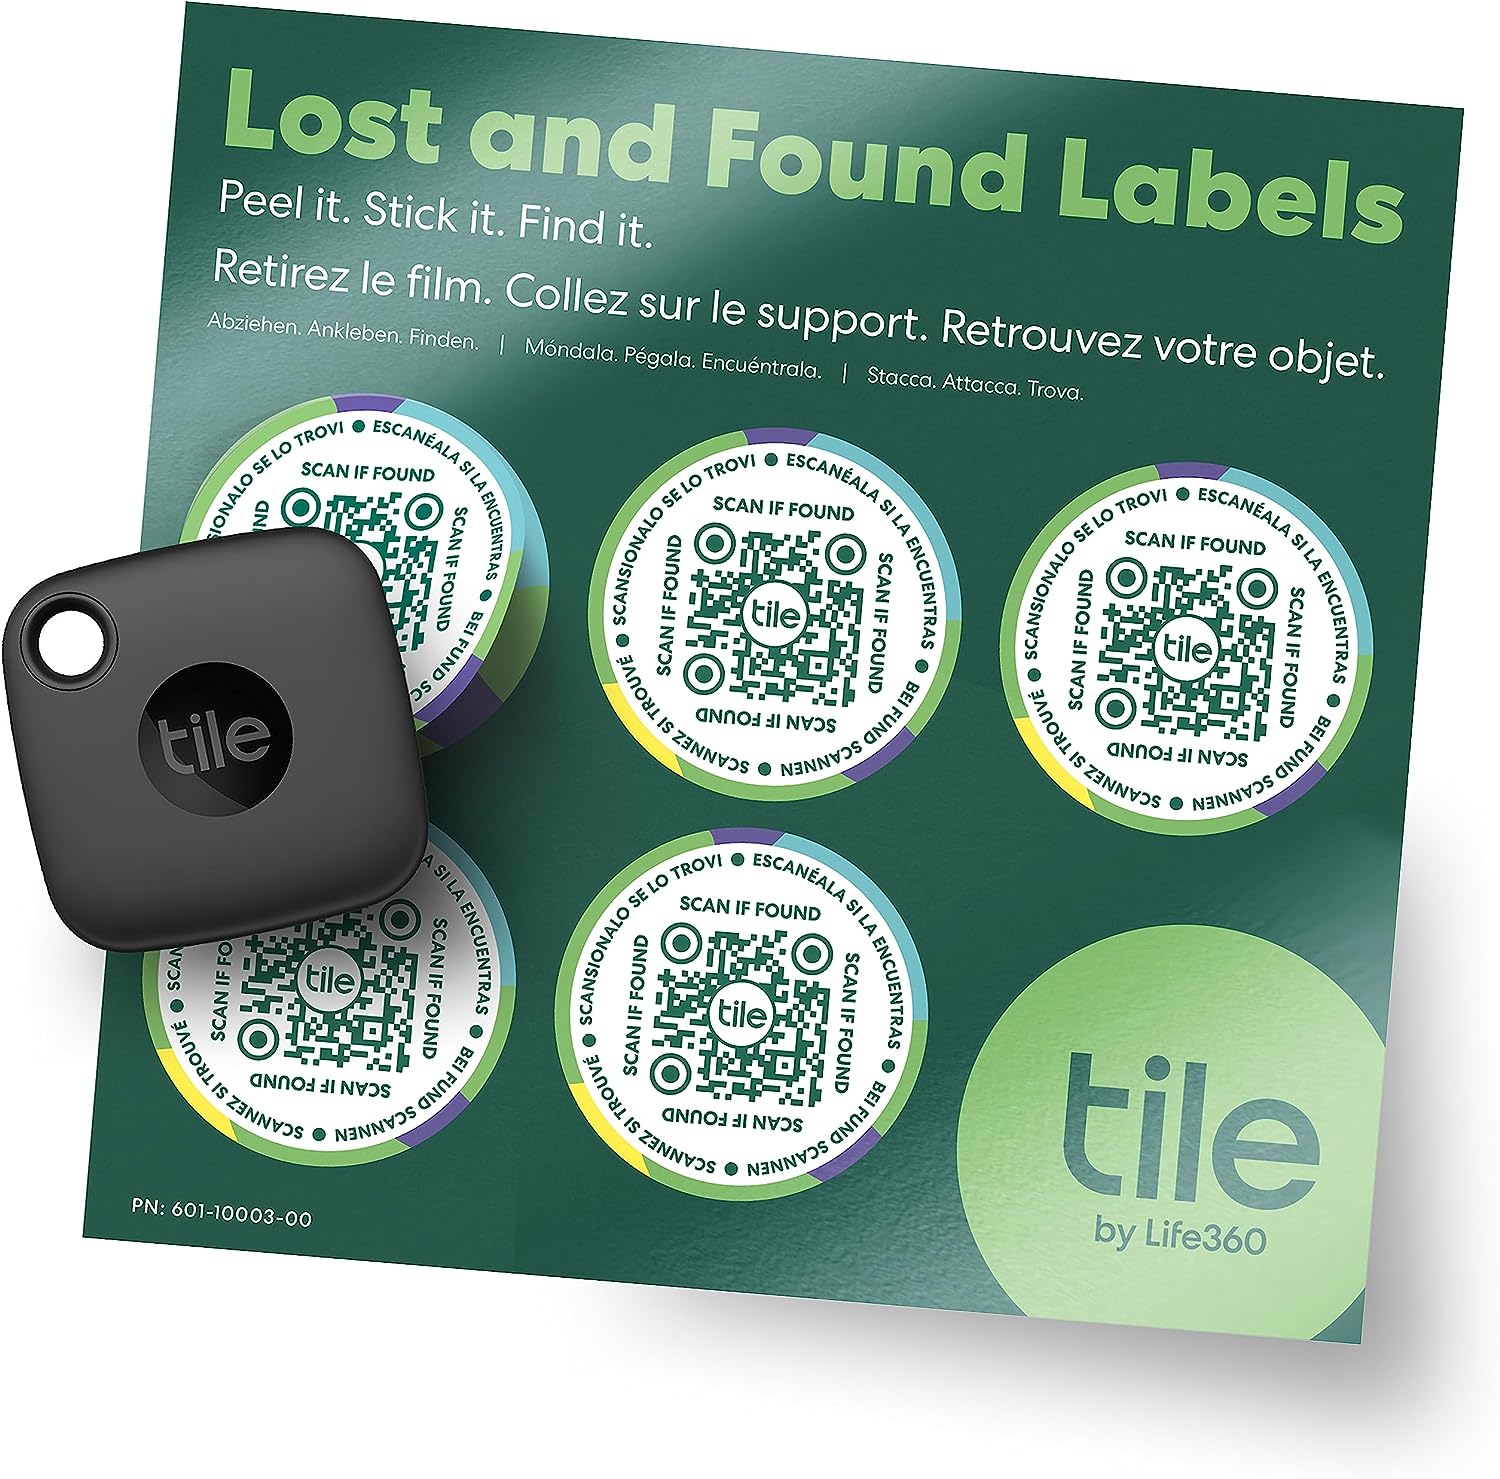 The image shows a set of TileMate lost and found labels.